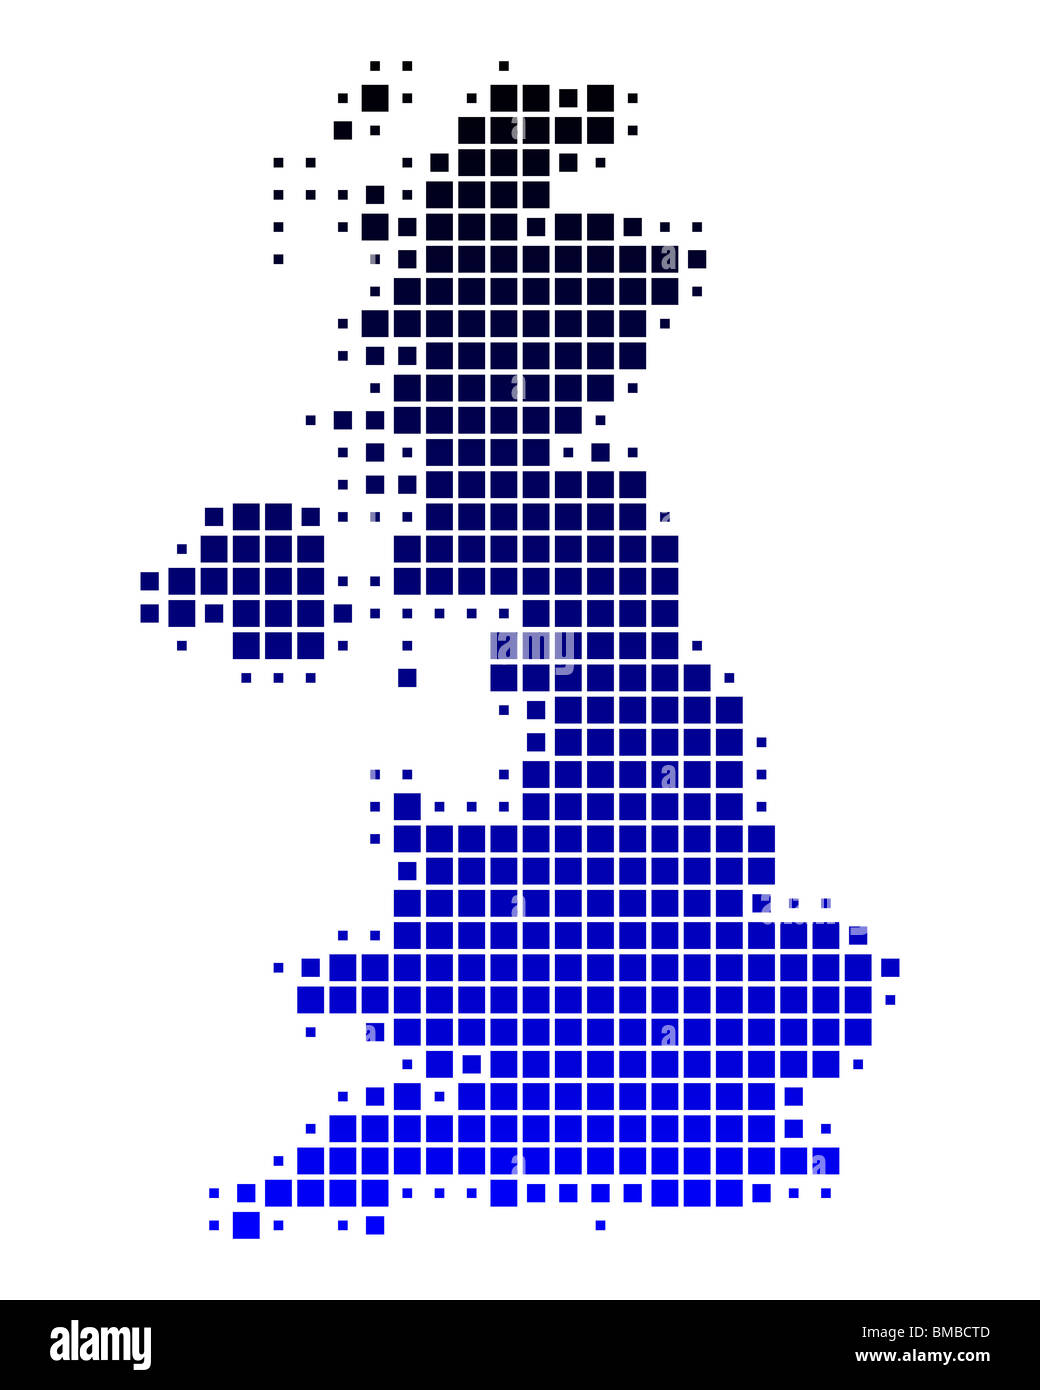 Map Of Great Britain BMBCTD 